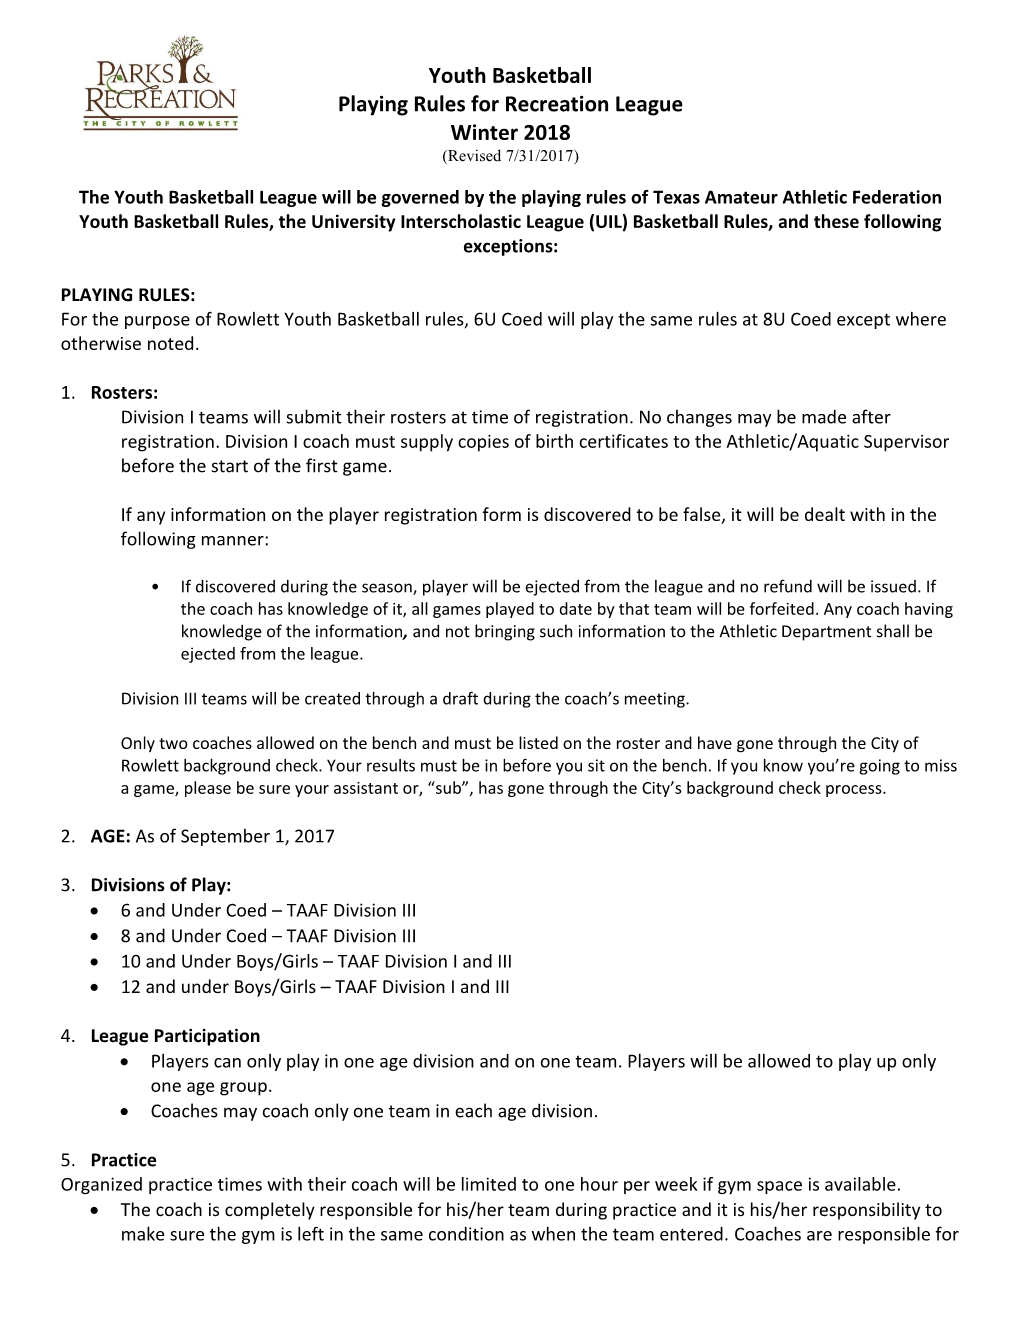 Youth Basketball Playing Rules for Recreation League Winter 2018 (Revised 7/31/2017)